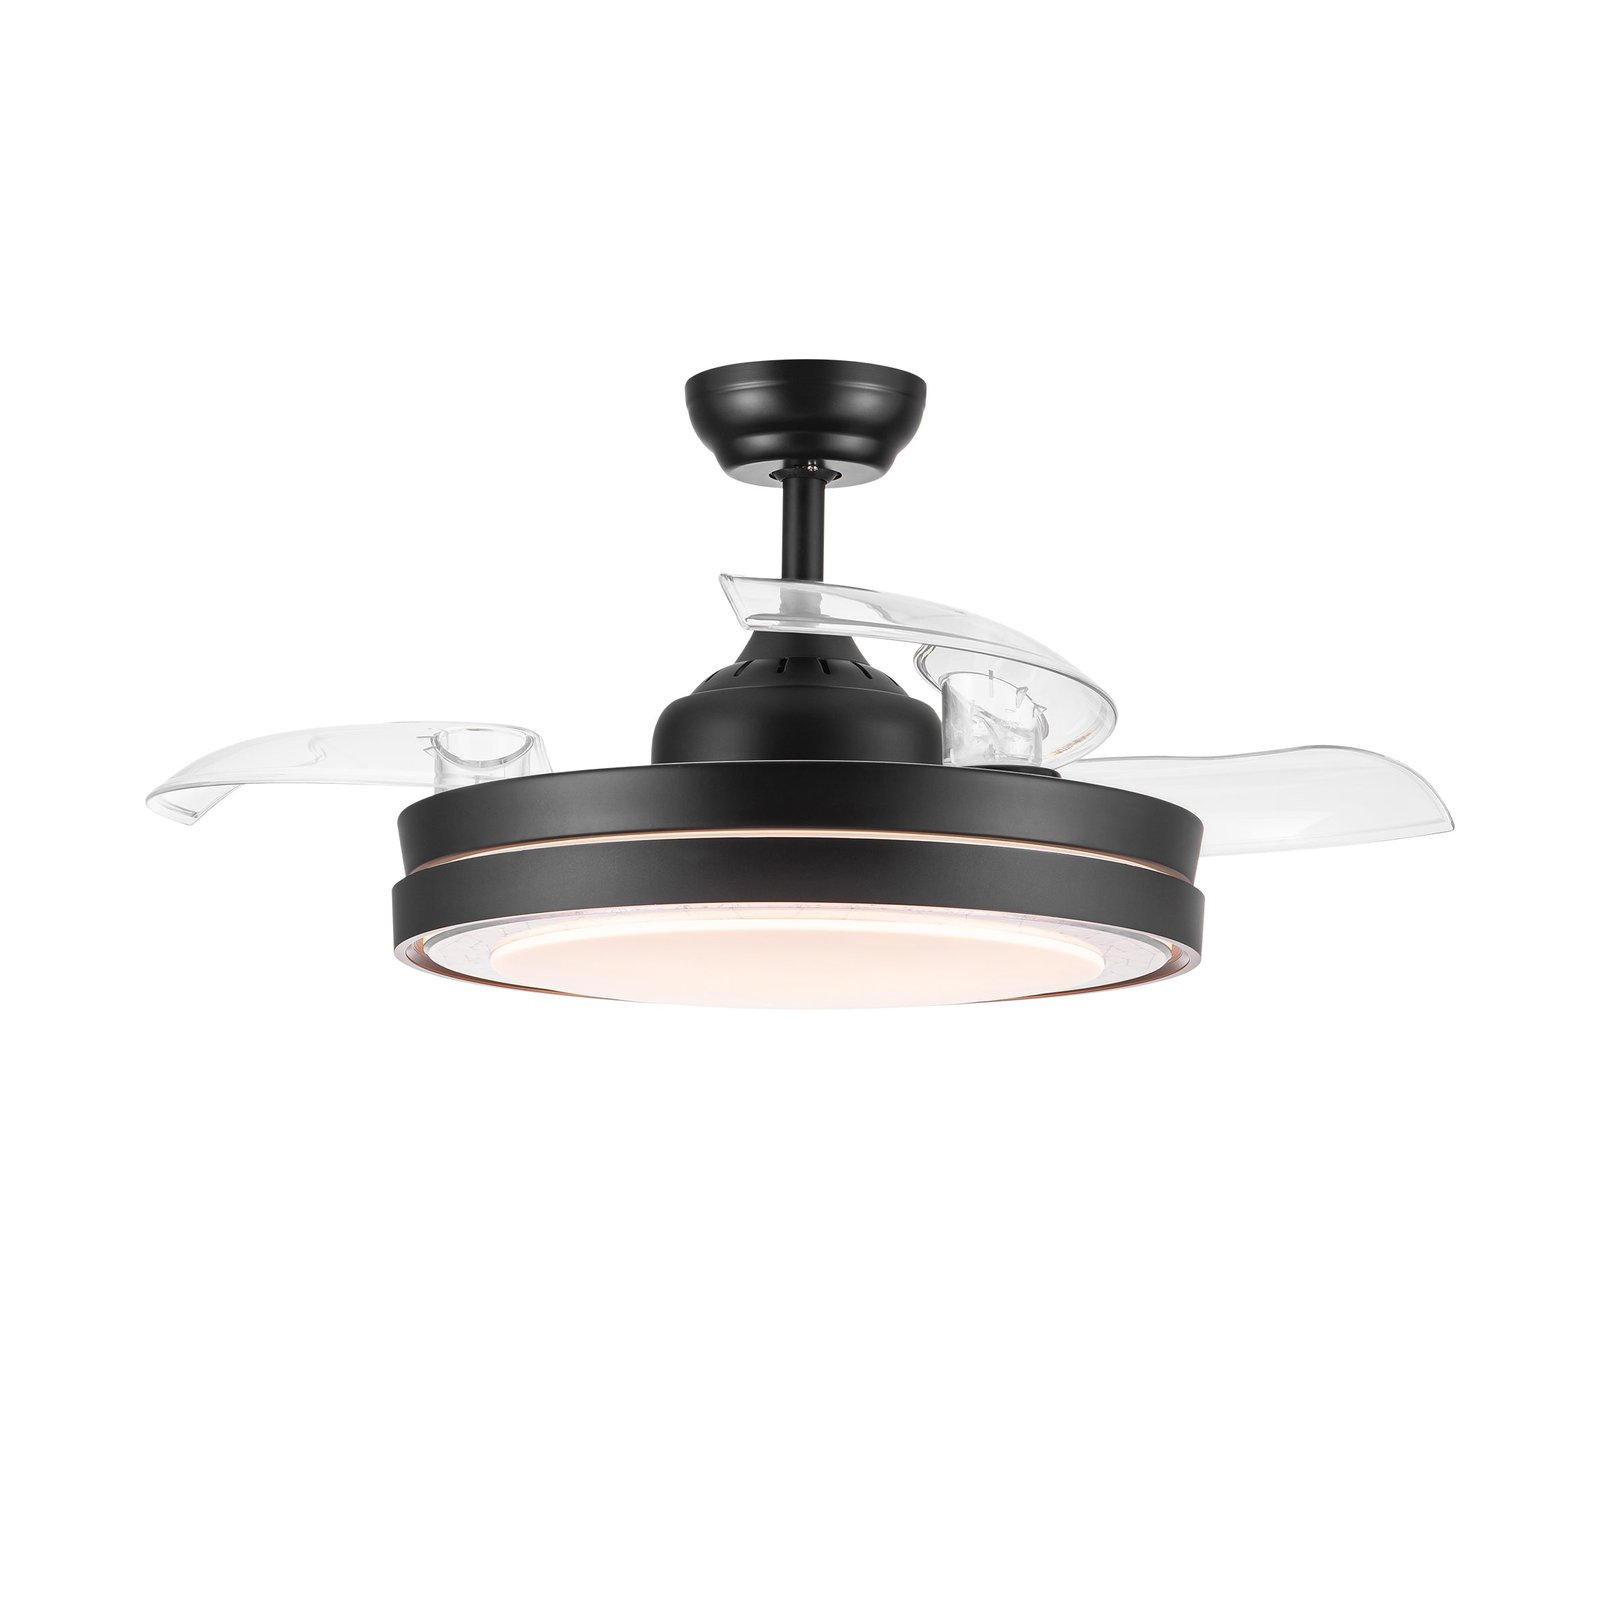 Black Shade Frame 42 In. Integrated LED Retractable Ceiling Fan with Remote Control, Dimensions ∅ 42″ x H 15″ (Dia 106cm x H 38cm), in Black